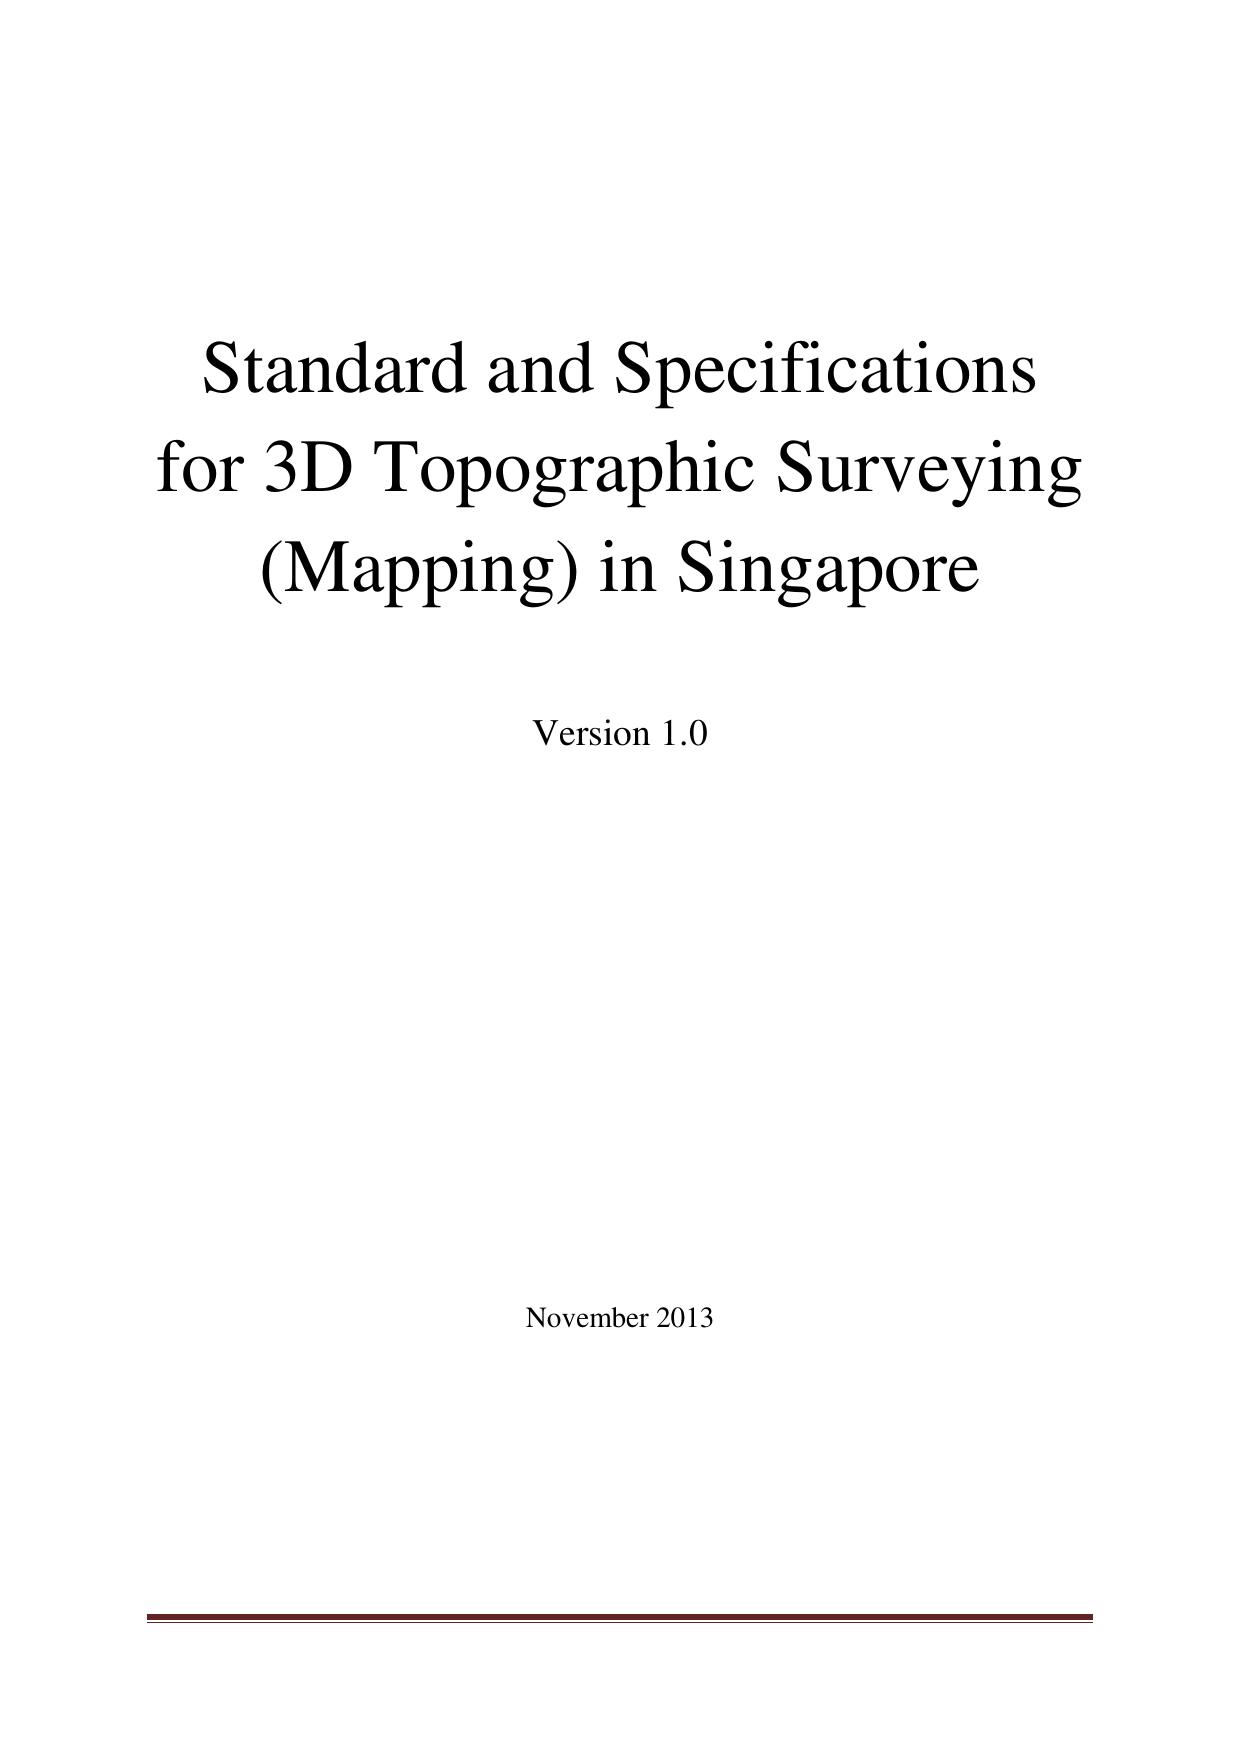 Standard and Specifications for 3D Topographic Mapping in Singapore Version1 Nov 2013